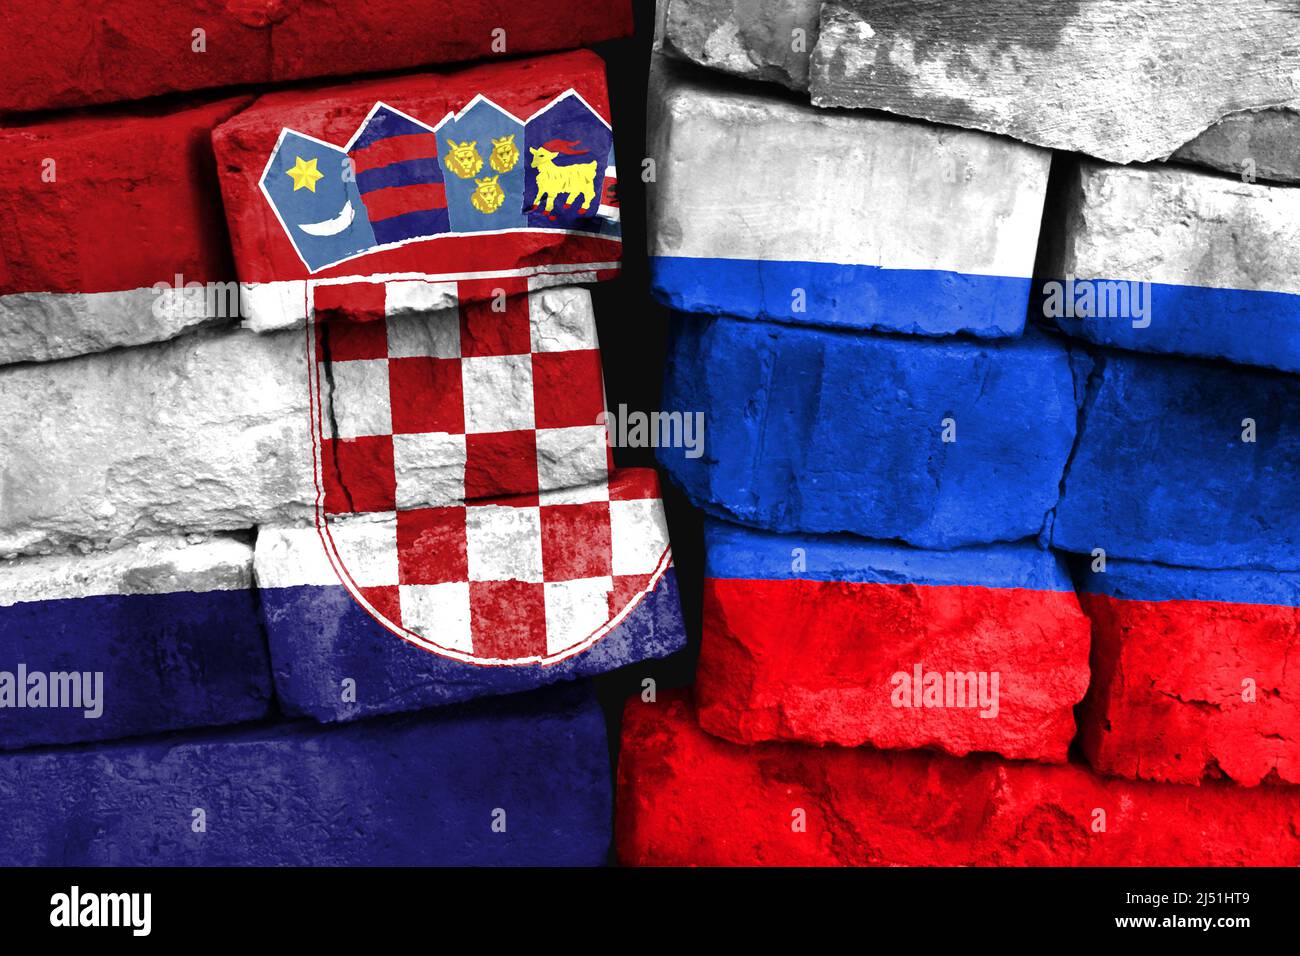 Concept of the relationship between Croatia and Russia with two painted flags on a damaged brick wall Stock Photo